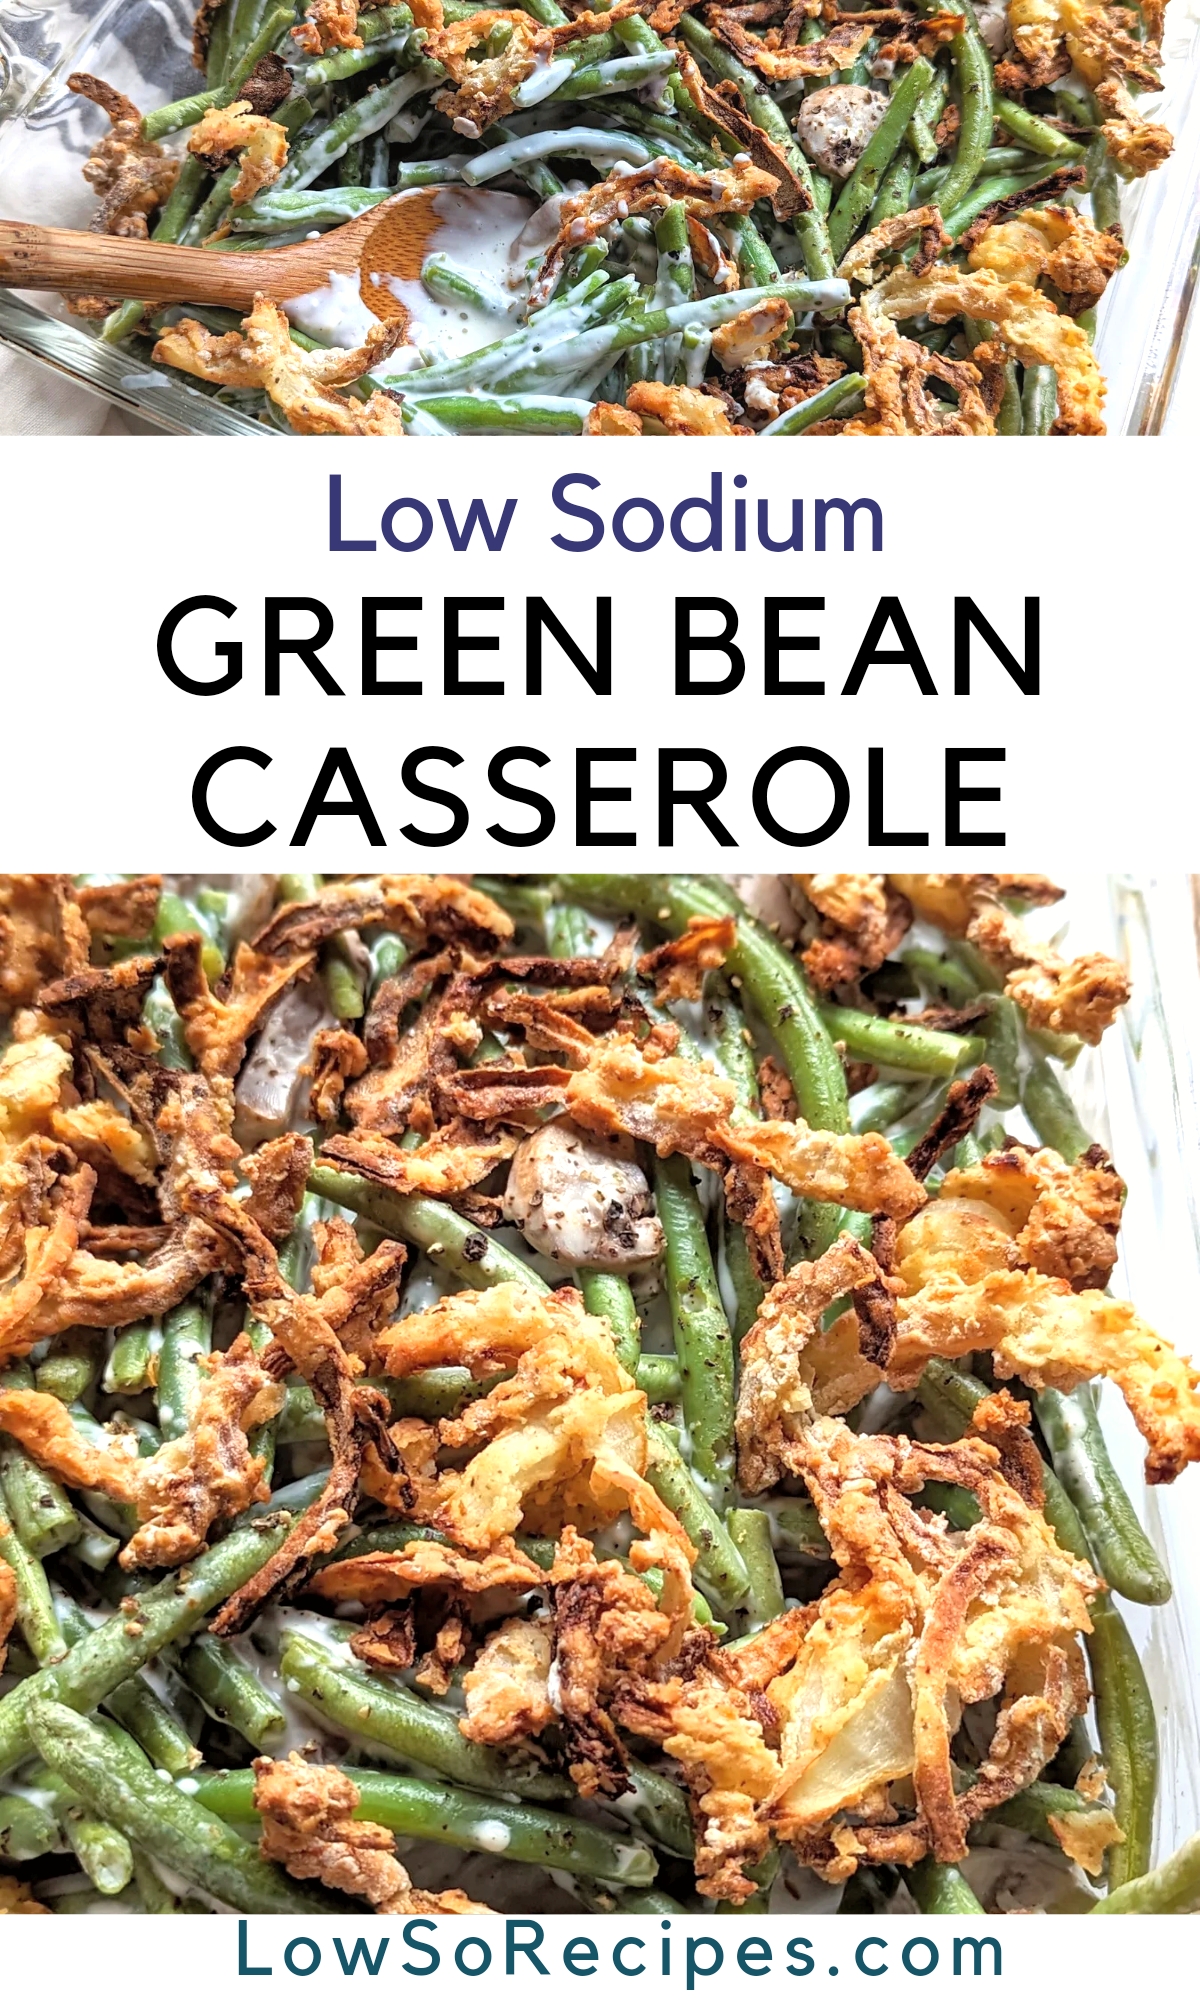 low sodium green bean casserole recipe easy salt free holiday recipes low sodium casseroles for thanksgiving, hannukah, christmas, easter, or any holiday